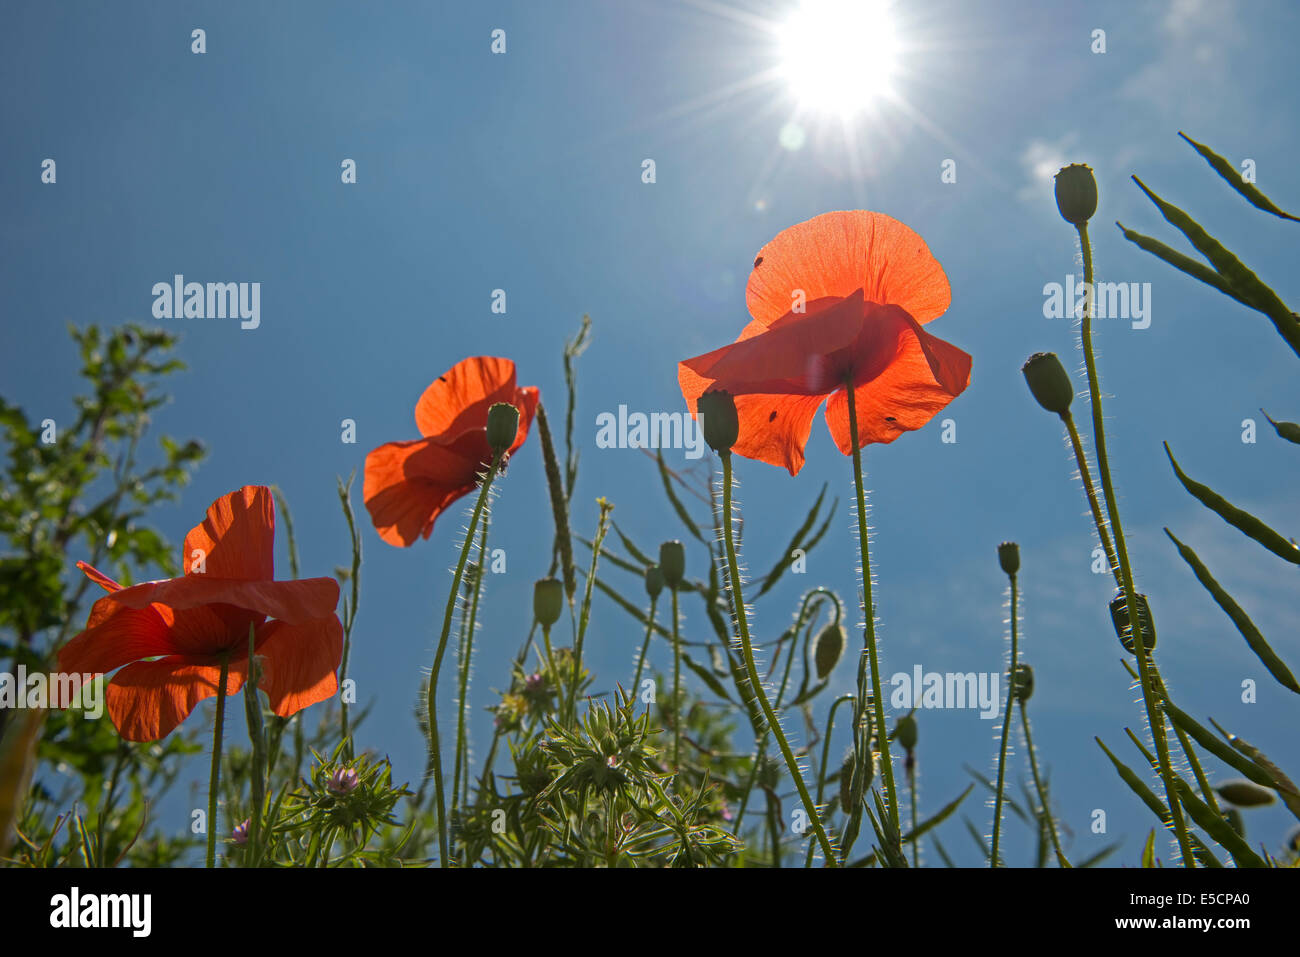 Corn poppies, Papaver rhoeas, red flowers against a summer sun and blue sky Stock Photo